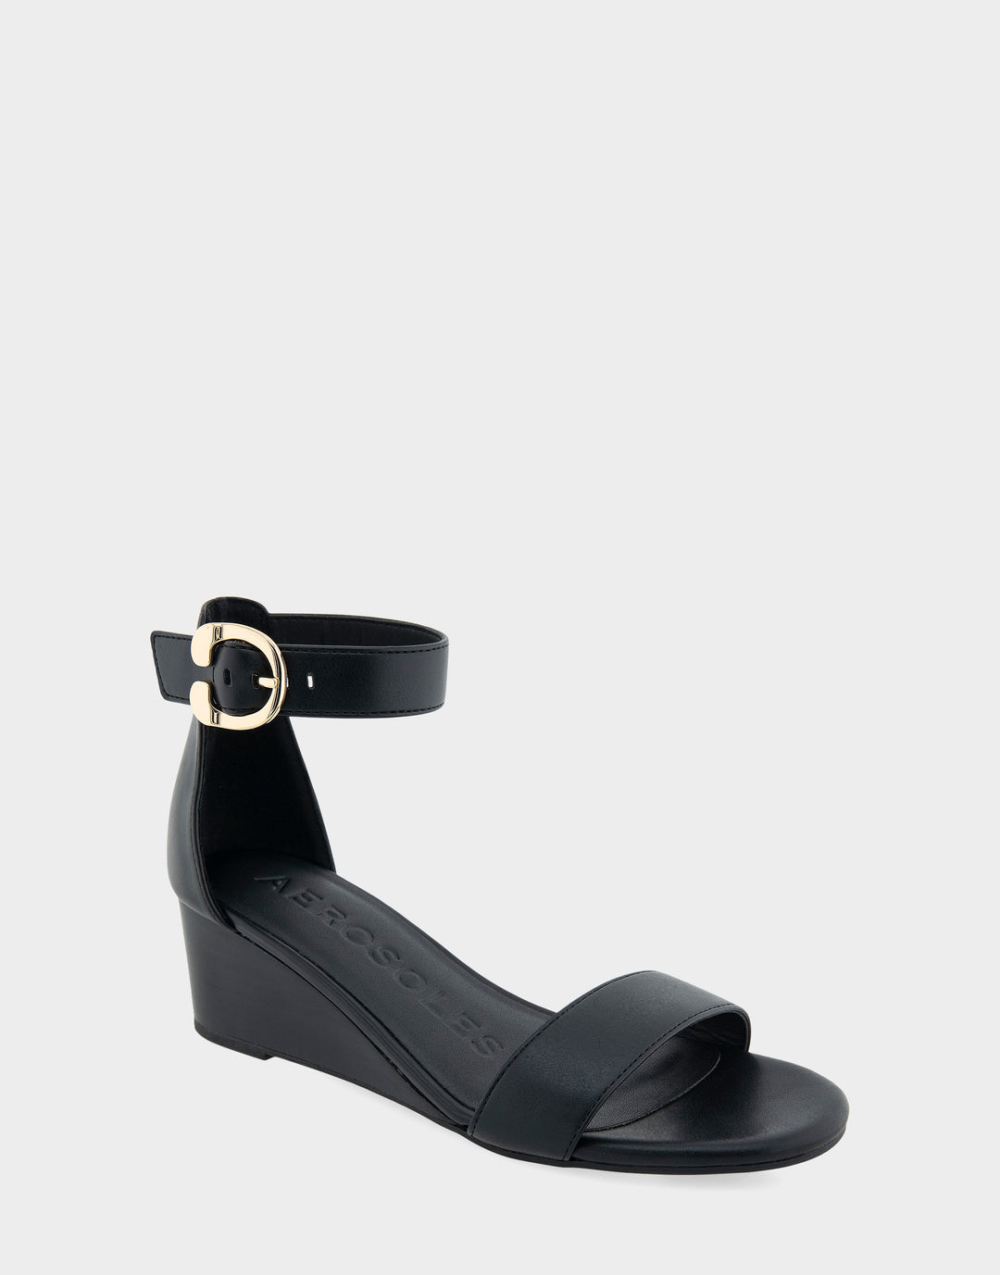 Women's | Willis Black Faux Leather Ankle Strap Mid Wedge Sandal